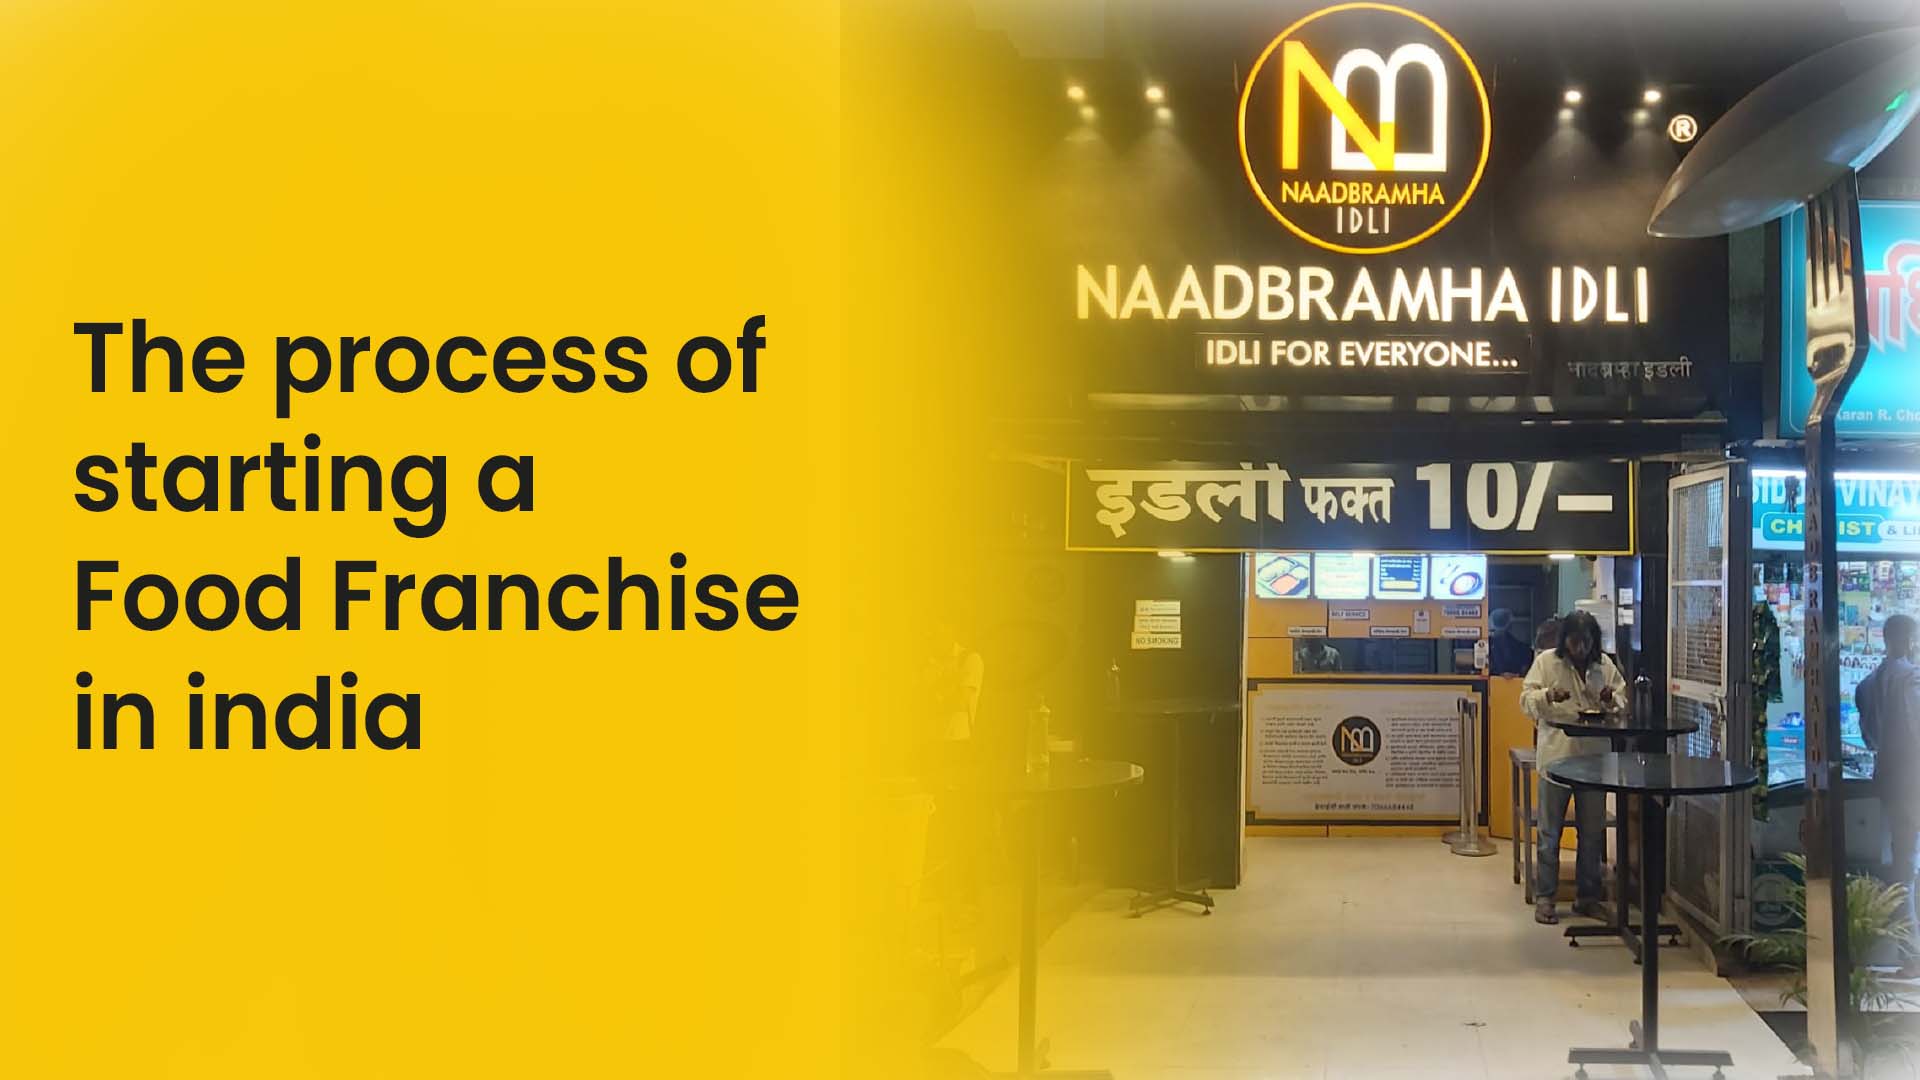 The process of starting a food franchise in India